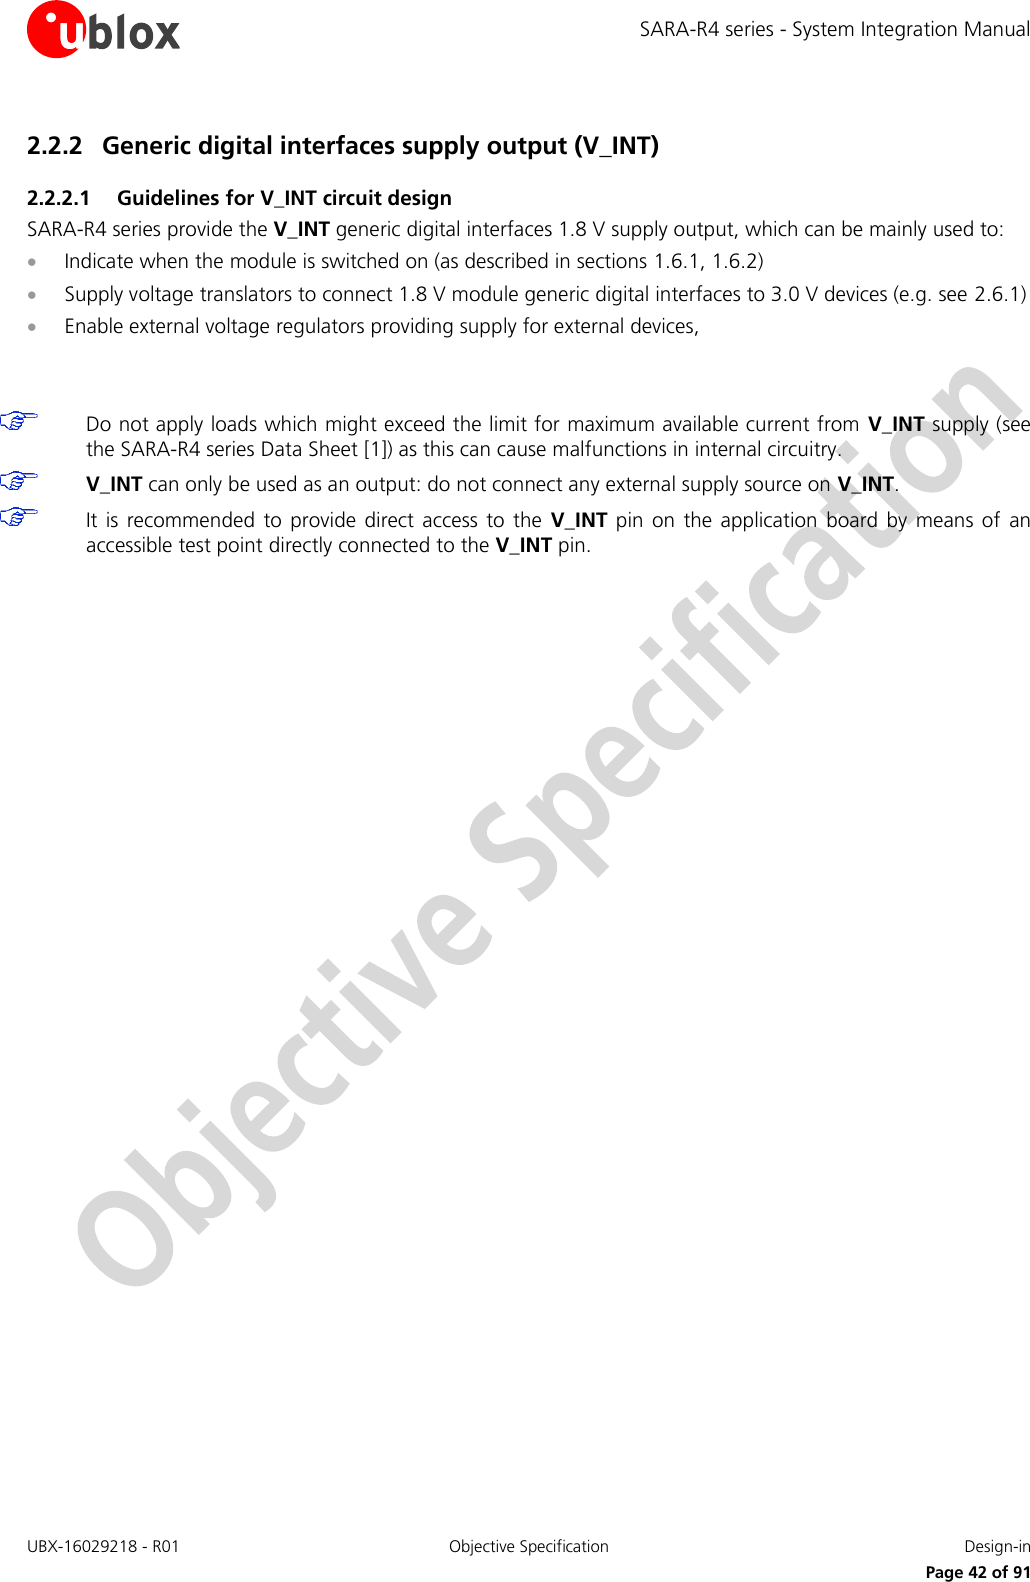 SARA-R4 series - System Integration Manual UBX-16029218 - R01  Objective Specification  Design-in     Page 42 of 91 2.2.2 Generic digital interfaces supply output (V_INT)  2.2.2.1 Guidelines for V_INT circuit design SARA-R4 series provide the V_INT generic digital interfaces 1.8 V supply output, which can be mainly used to:  Indicate when the module is switched on (as described in sections 1.6.1, 1.6.2)  Supply voltage translators to connect 1.8 V module generic digital interfaces to 3.0 V devices (e.g. see 2.6.1)  Enable external voltage regulators providing supply for external devices,     Do not apply loads which might exceed the limit for maximum available current from V_INT supply (see the SARA-R4 series Data Sheet [1]) as this can cause malfunctions in internal circuitry.  V_INT can only be used as an output: do not connect any external supply source on V_INT.  It is  recommended  to  provide  direct  access  to  the  V_INT  pin  on  the application  board  by  means  of  an accessible test point directly connected to the V_INT pin.   